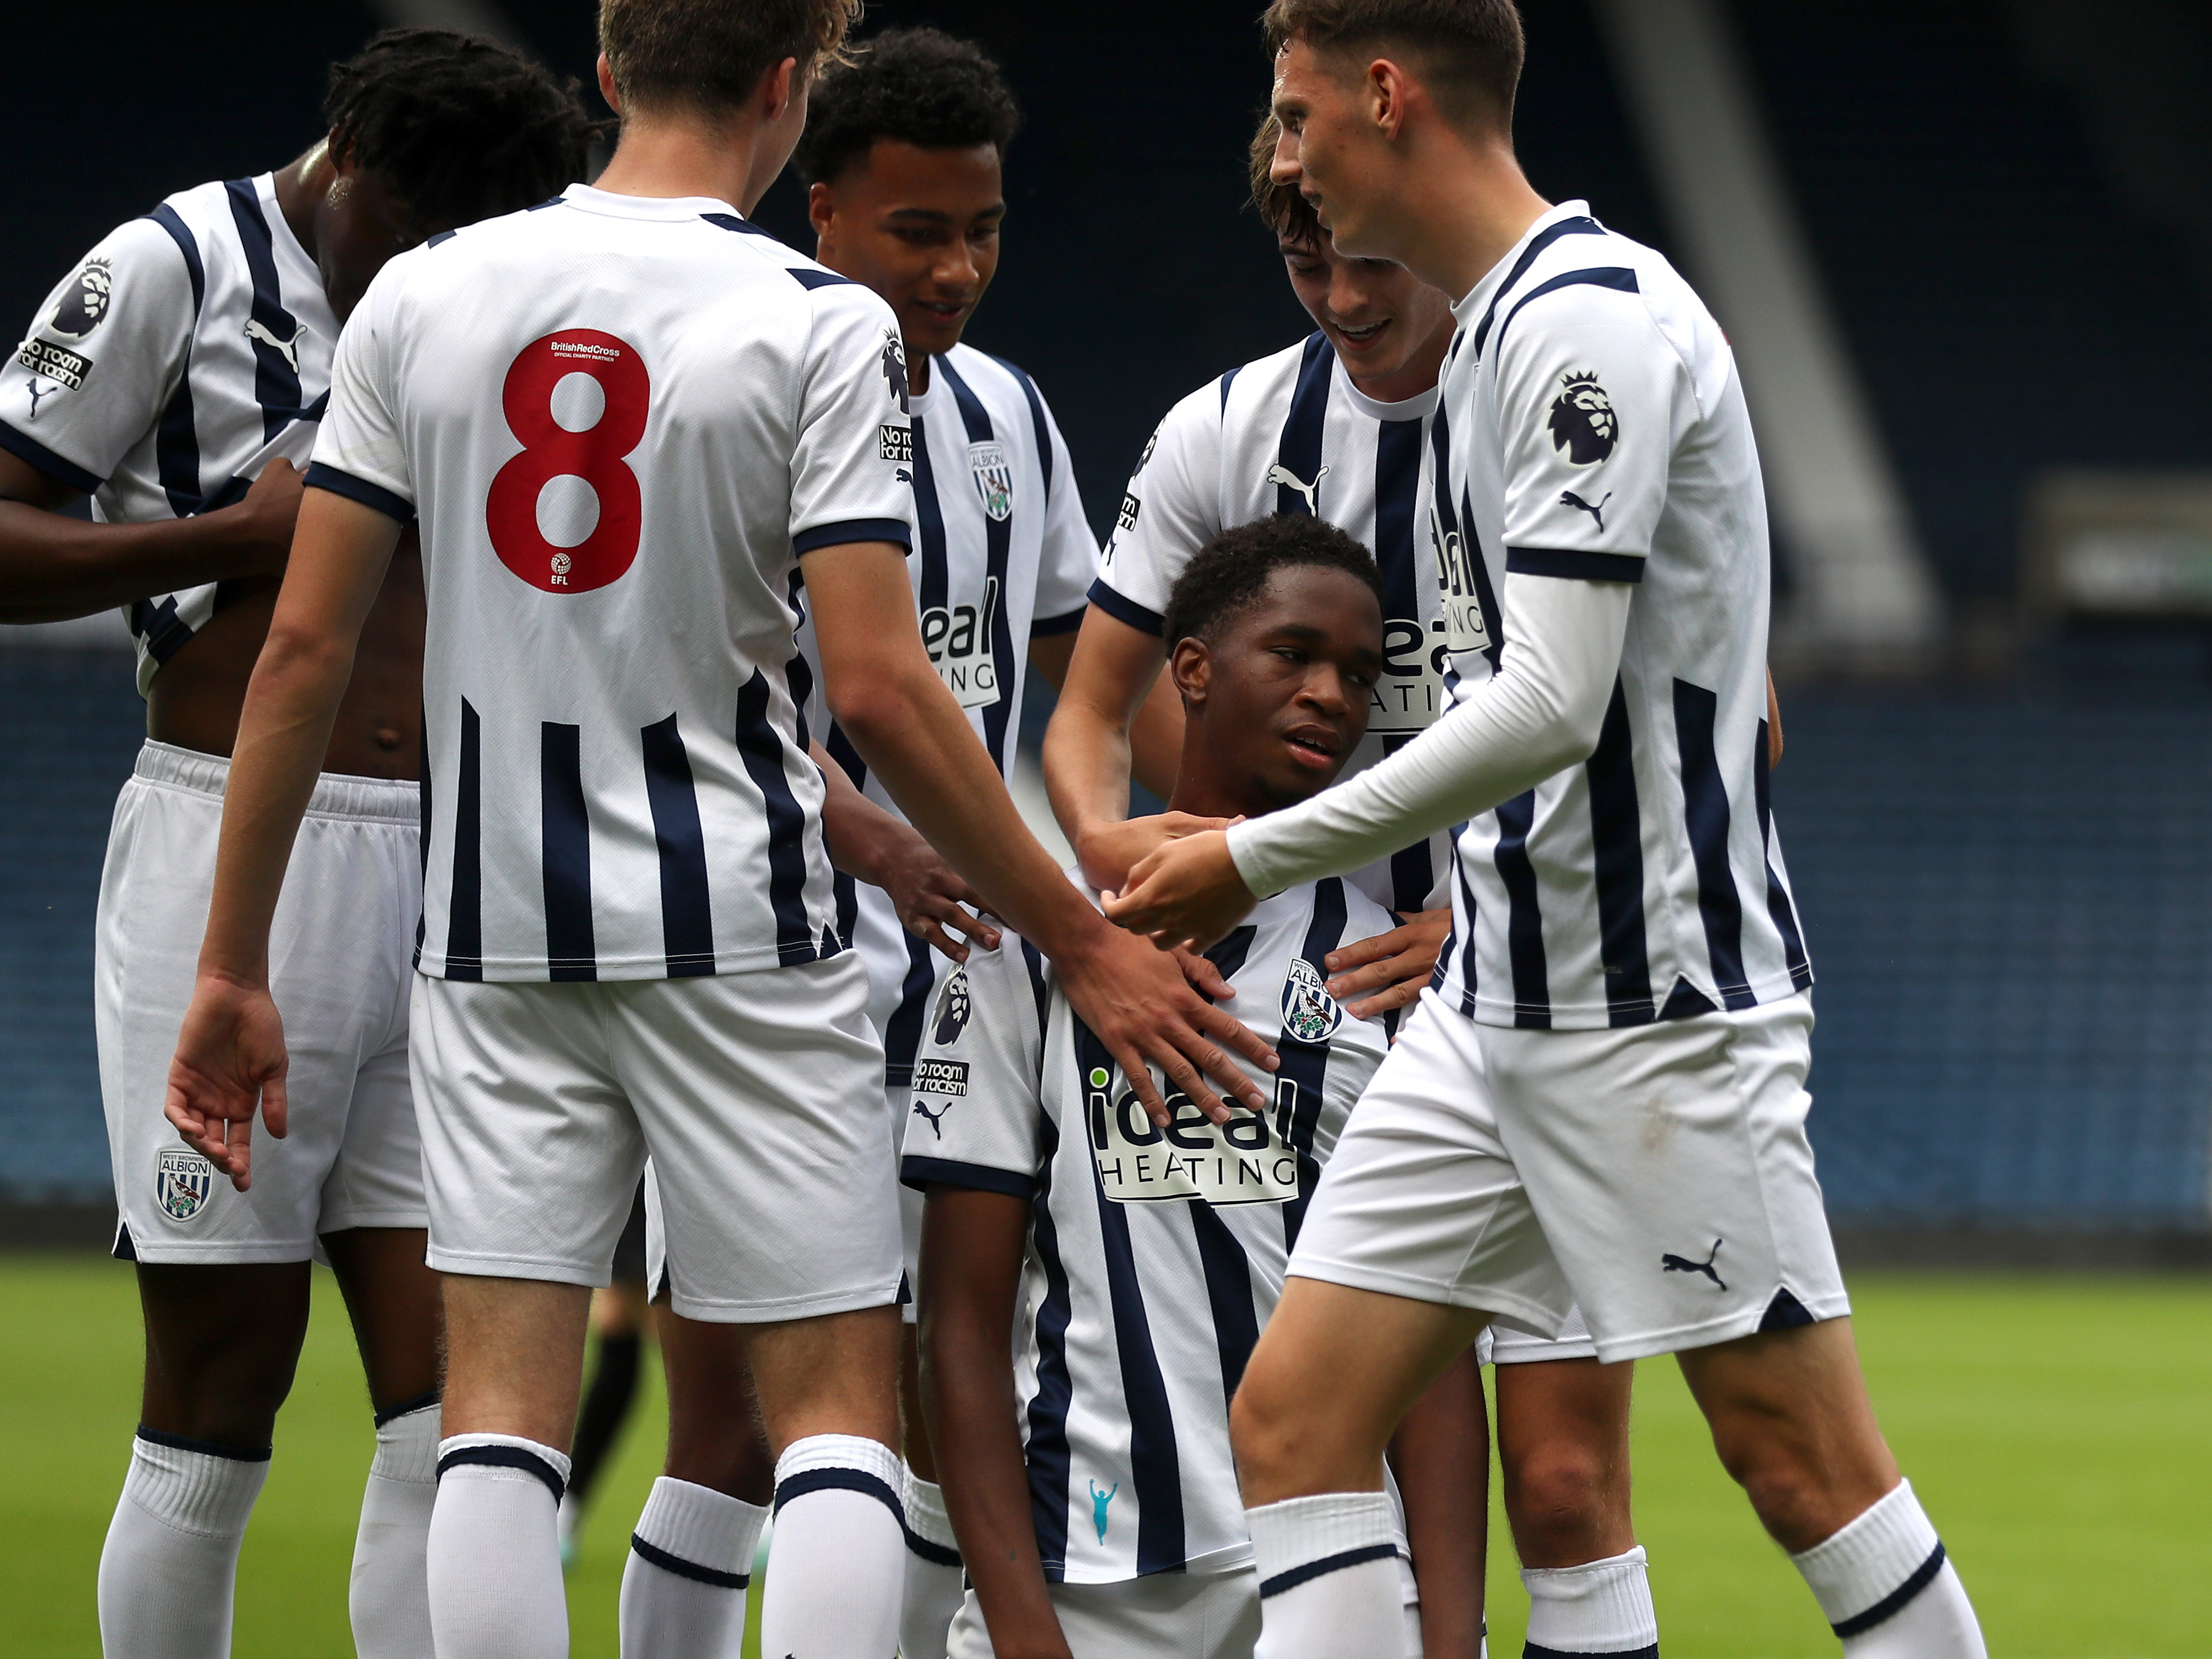 A photo of Albion youngster Kevin Mfuamba celebrating scoring against Blackburn Rovers during a PL2 game at The Hawthorns